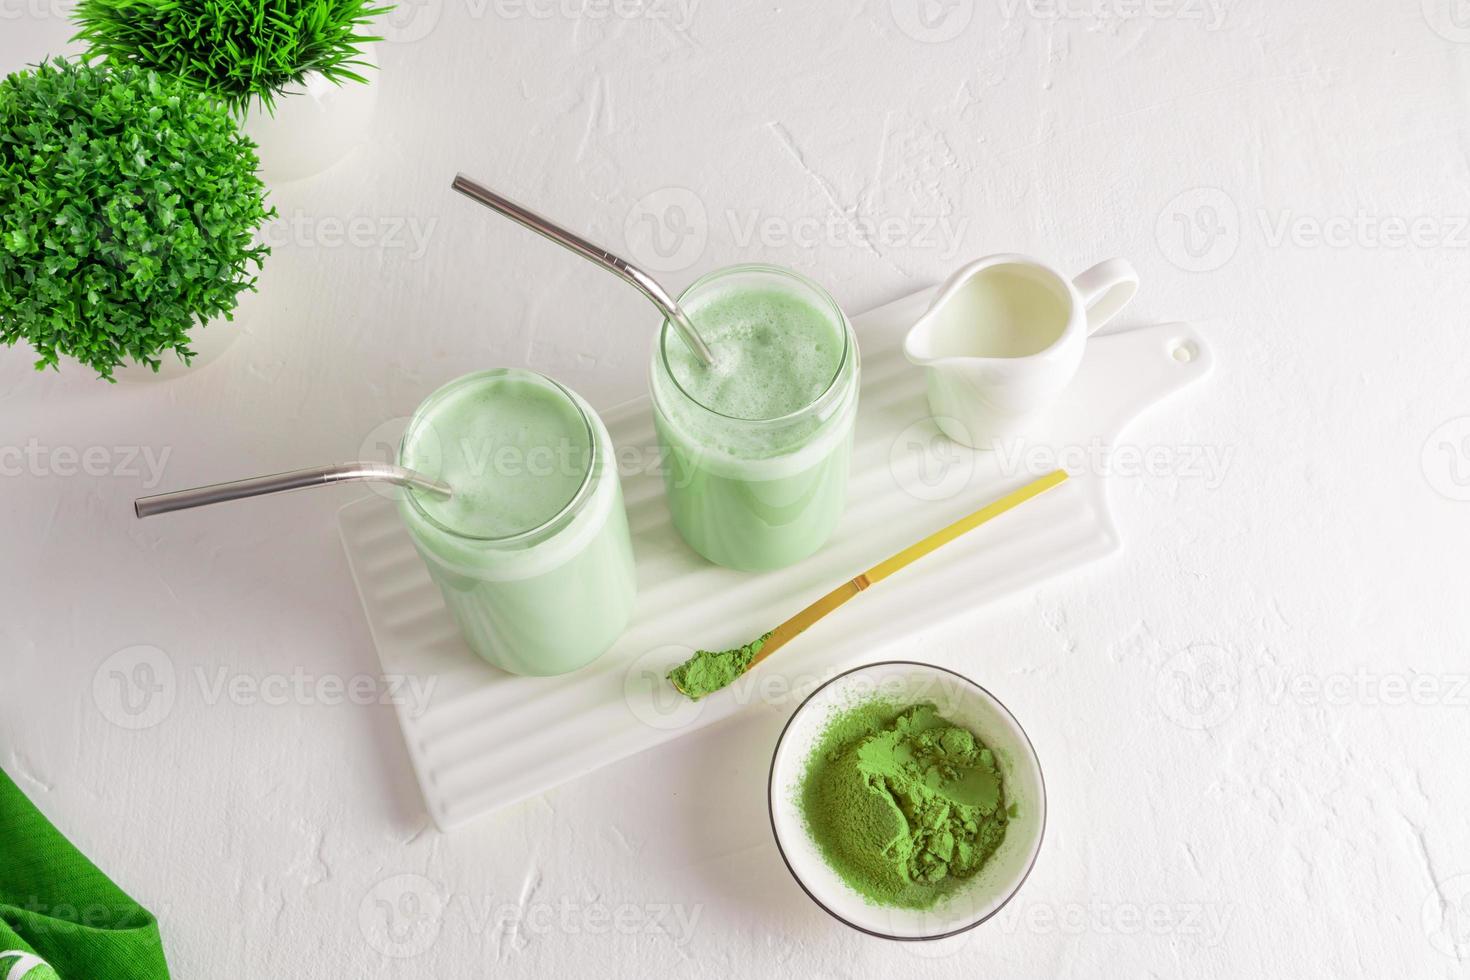 Iced tea matcha latte in two glass in the form of a beer can on a white ceramic board and awhite background with green plants. view from above. photo